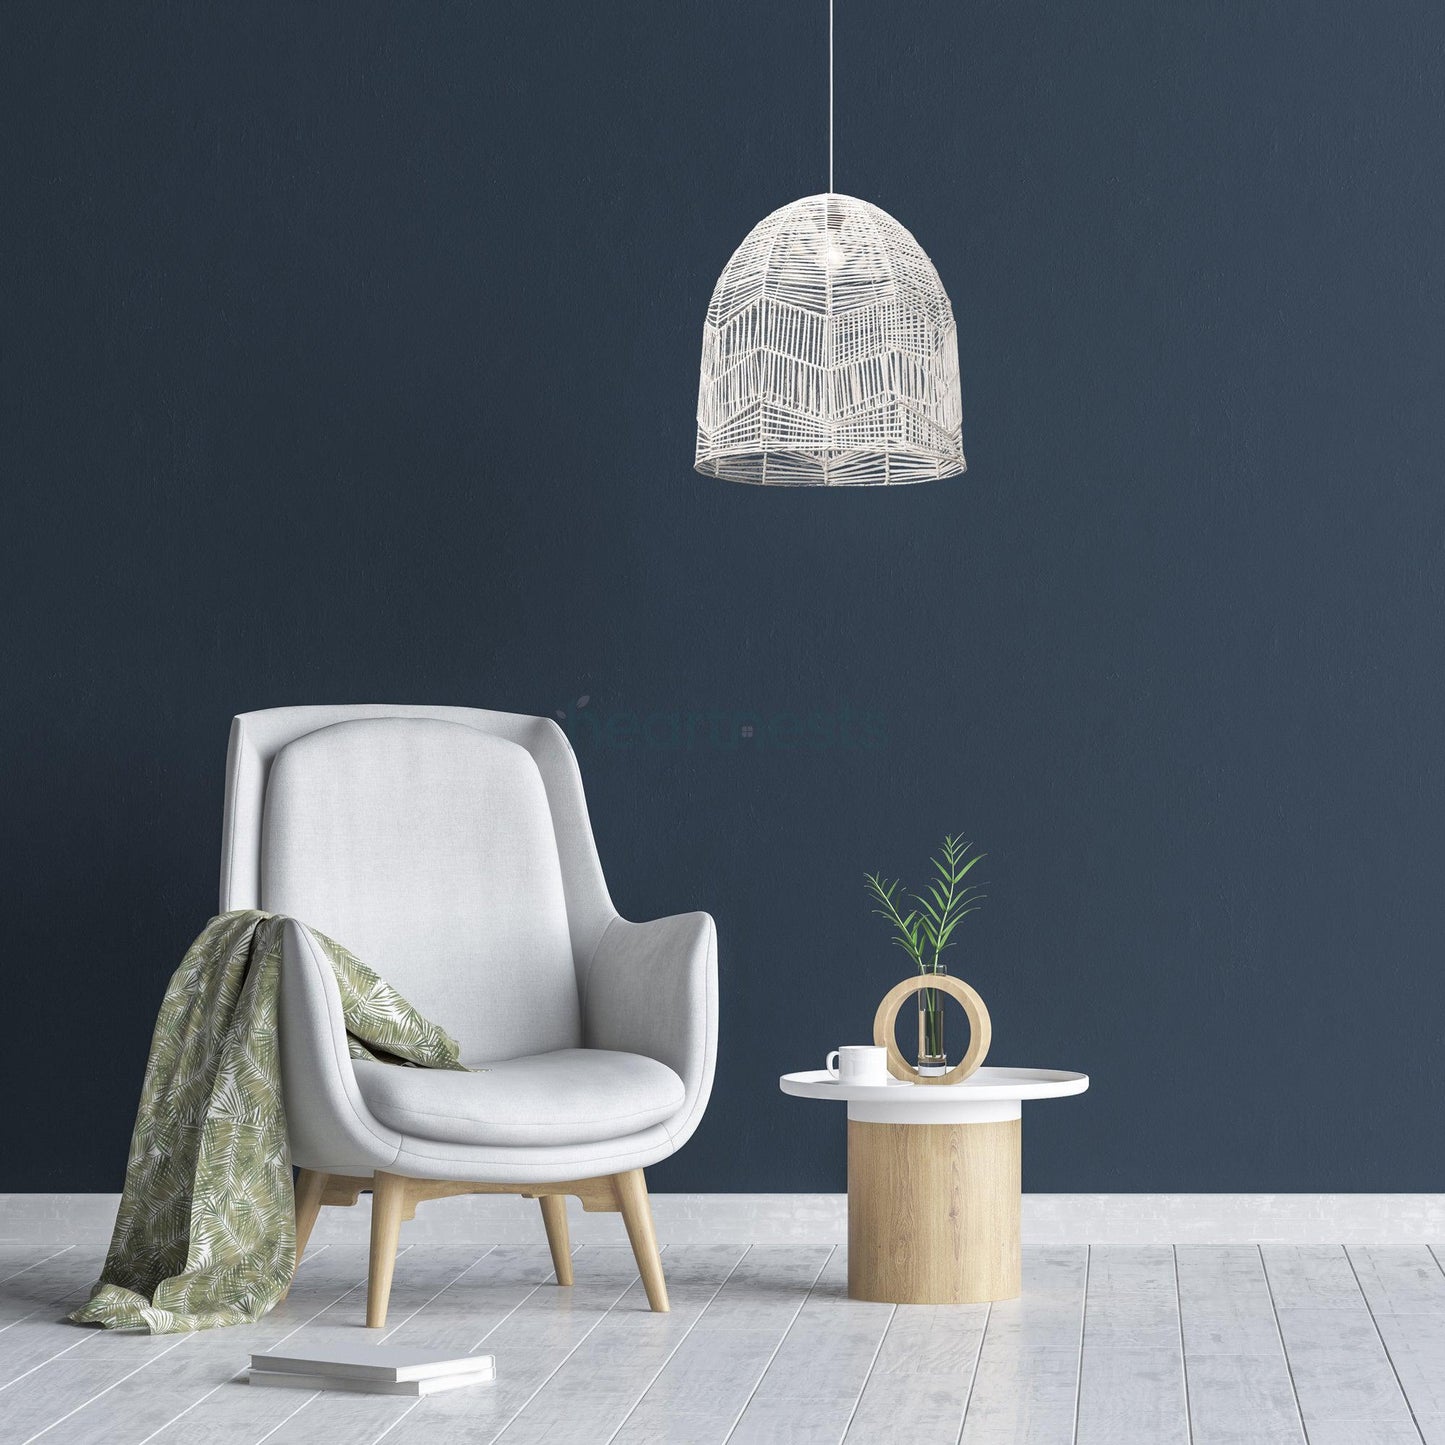 Whitewash Lacy rattan lace pendant light is hung above a small wood stool and a sofa. The room is painted dark blue